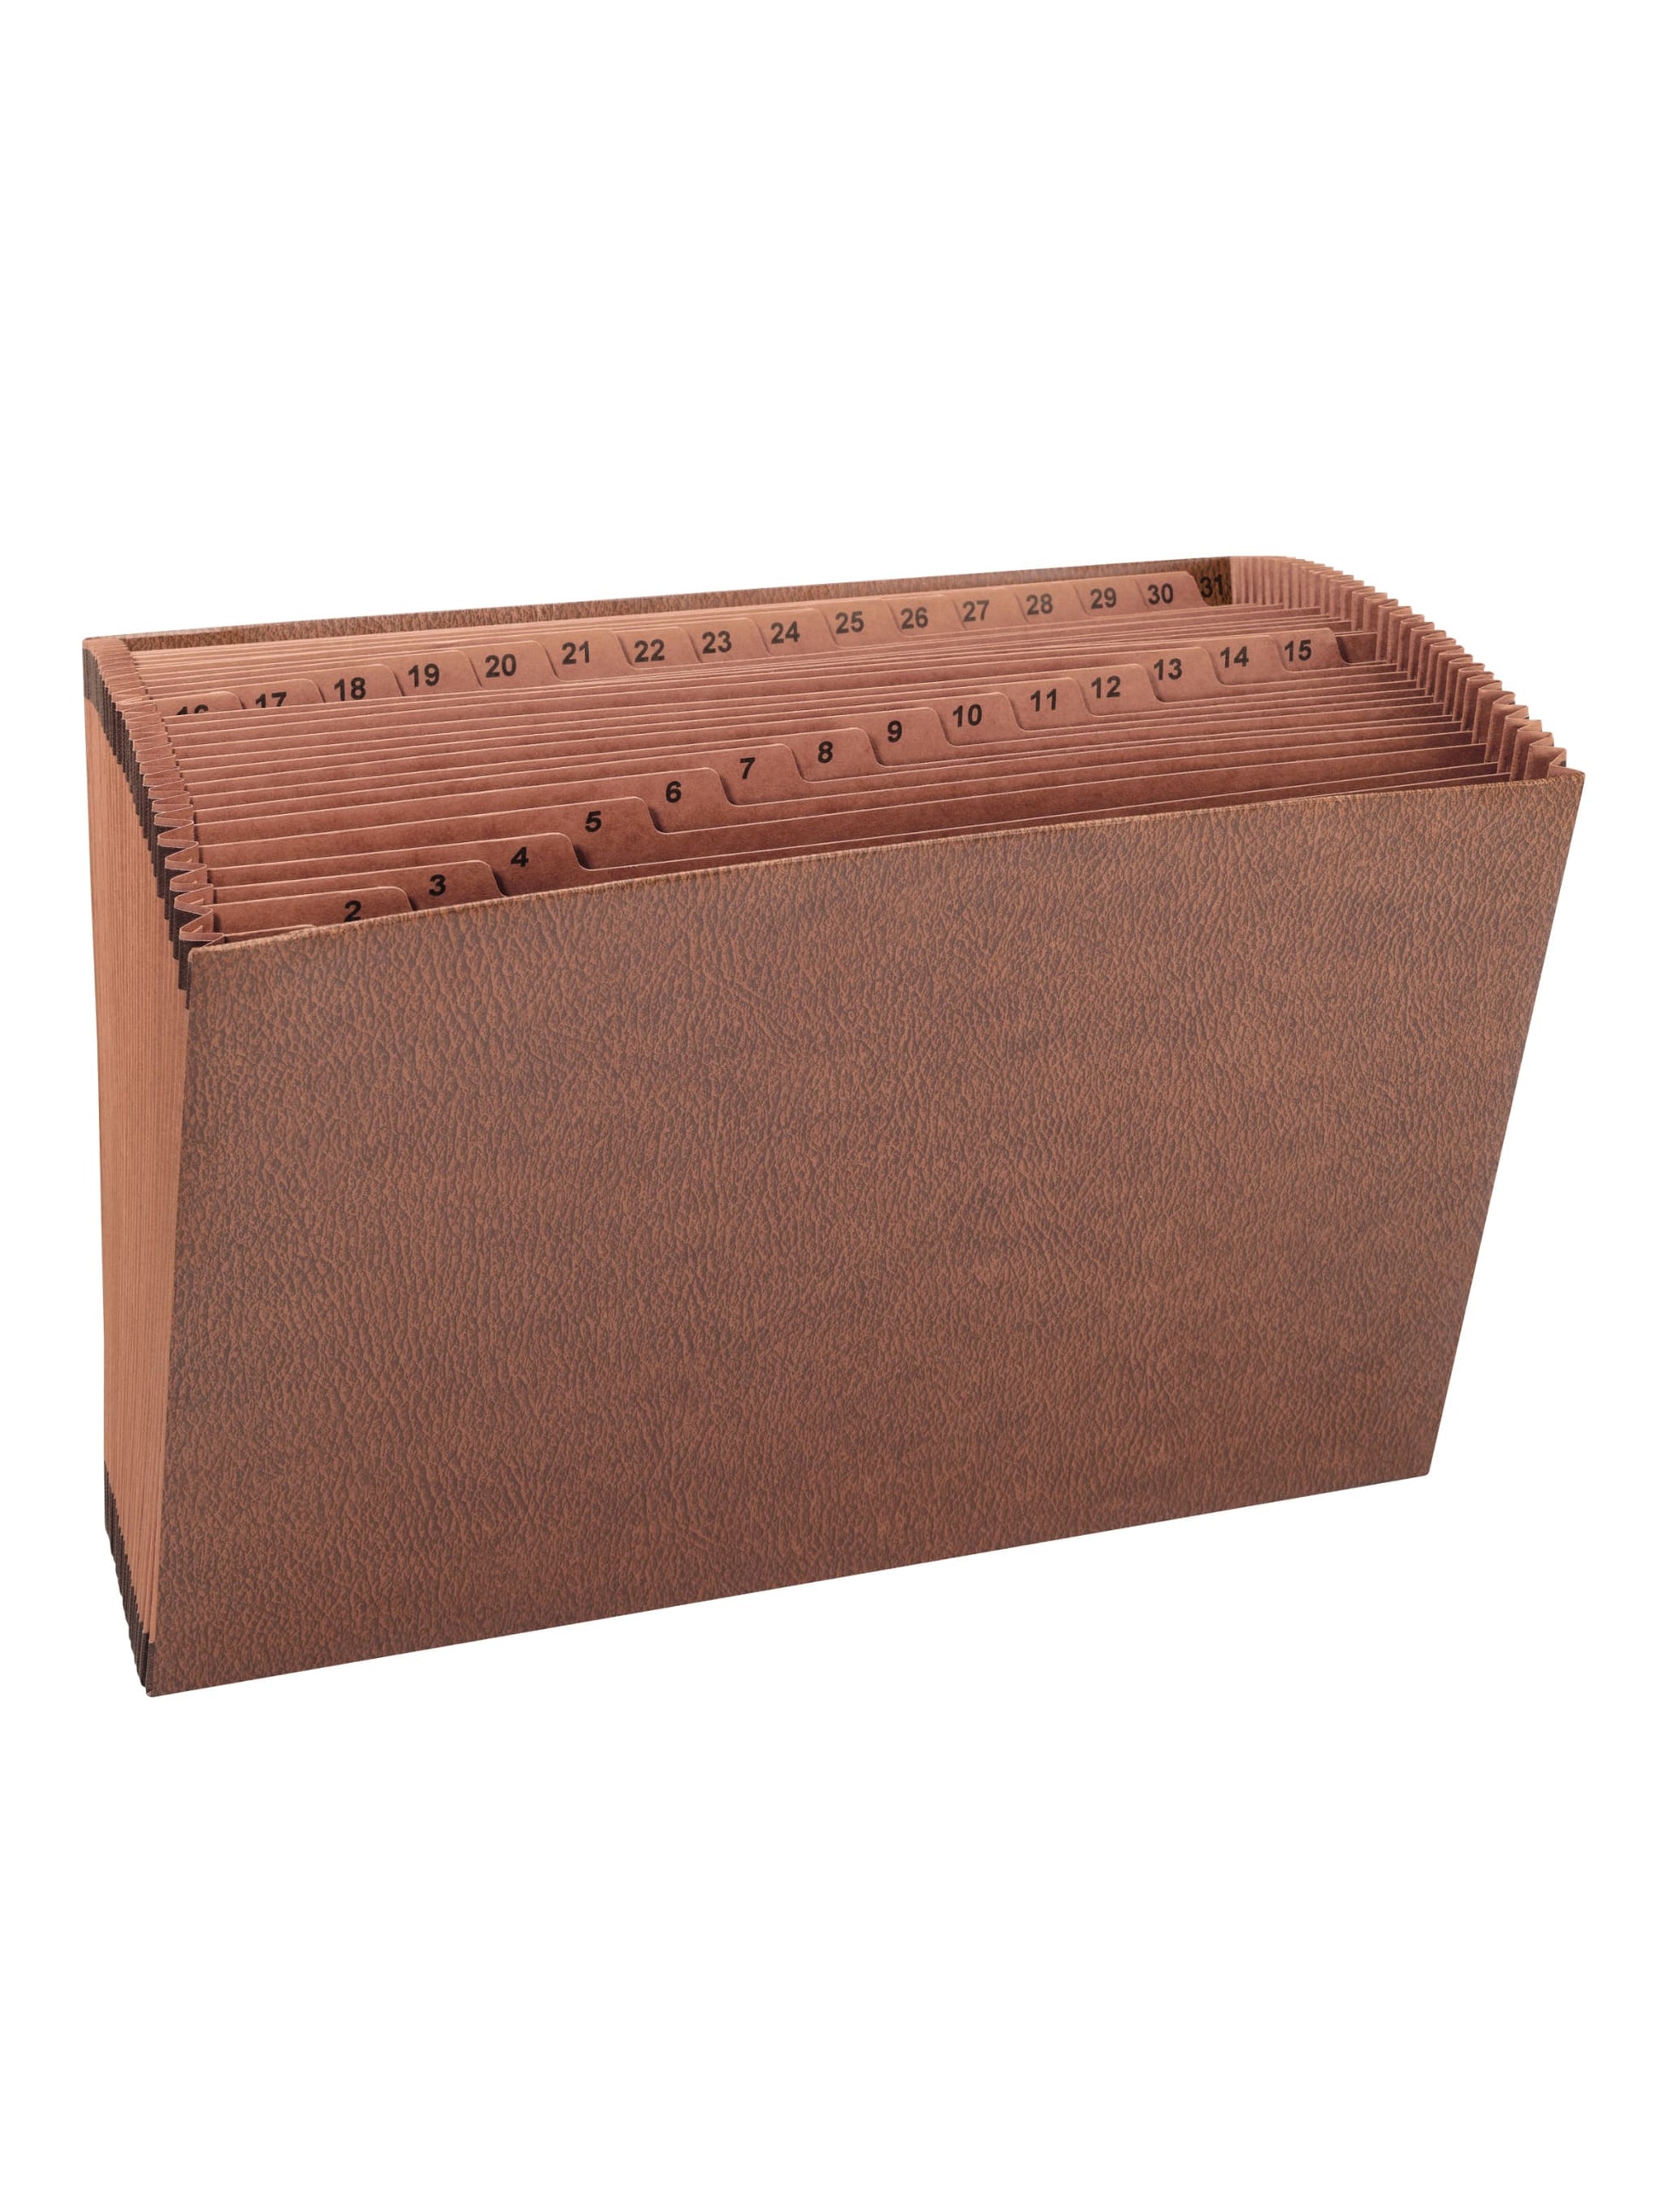 TUFF® Expanding Files, 12 Pockets, Daily 1-31, Brown Color, Legal Size, Set of 1, 086486704694